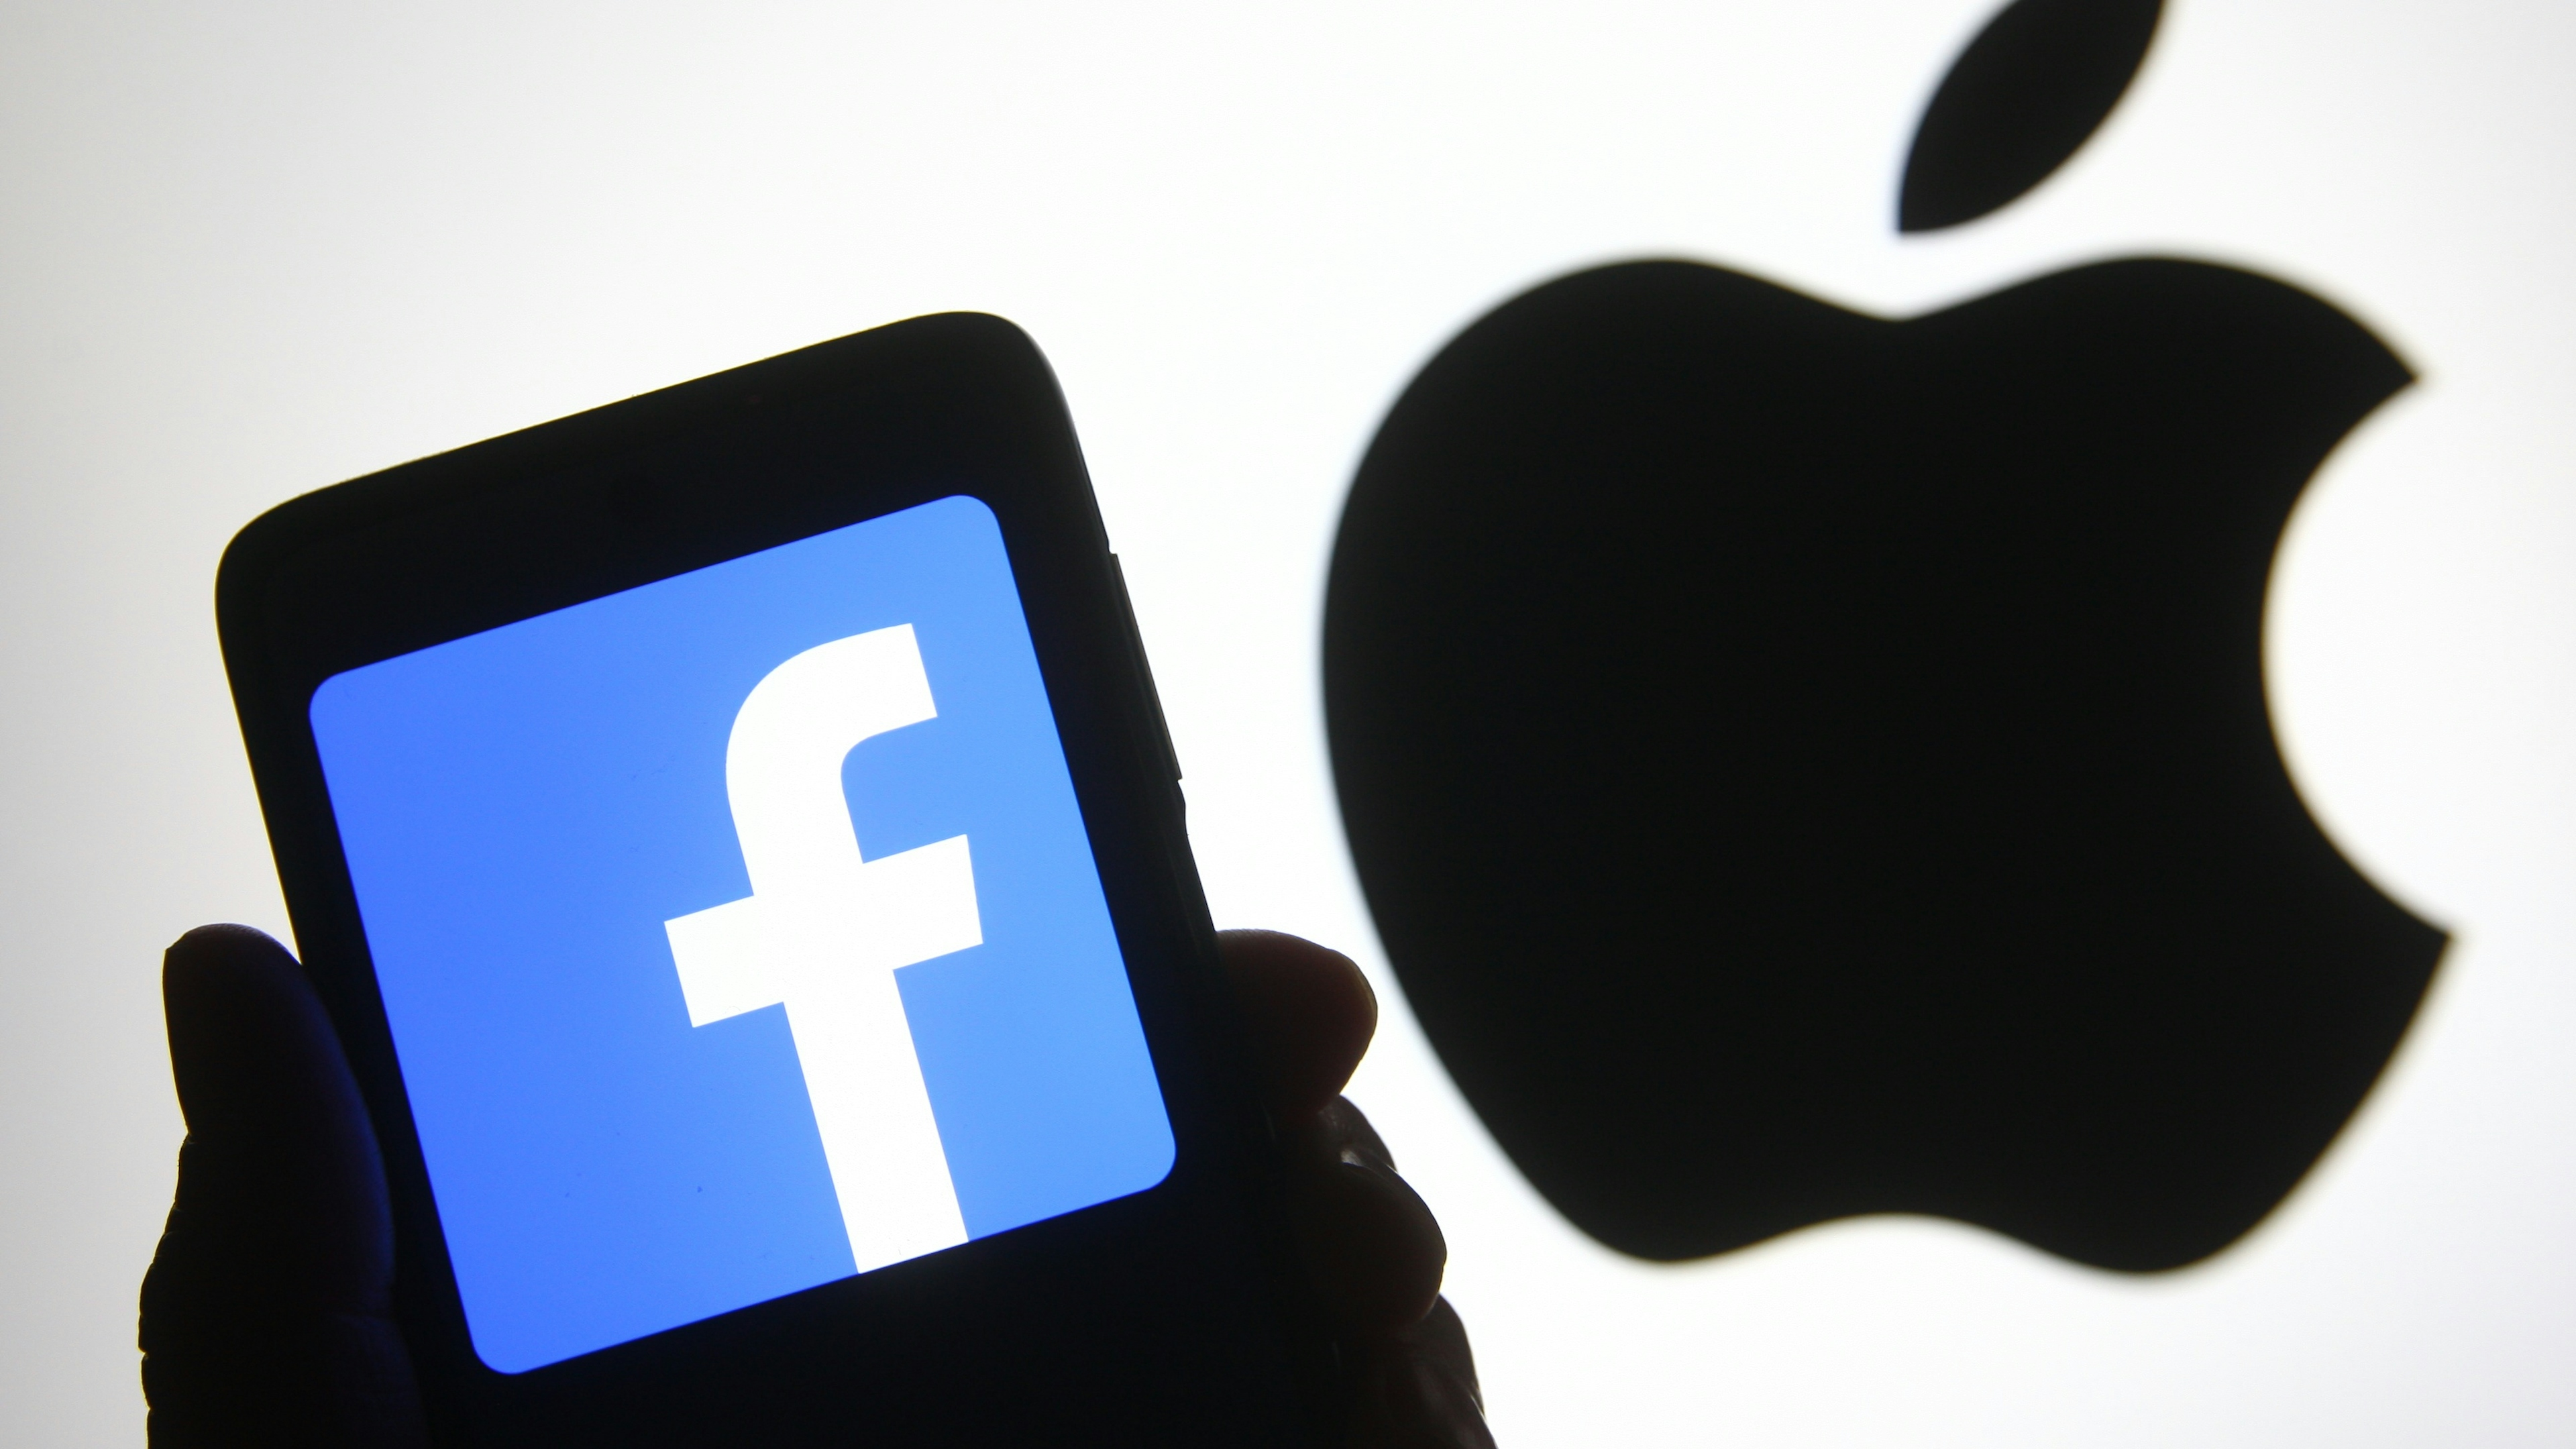 In this photo illustration, the Facebook logo seen displayed on a smartphone in front of an Apple logo.